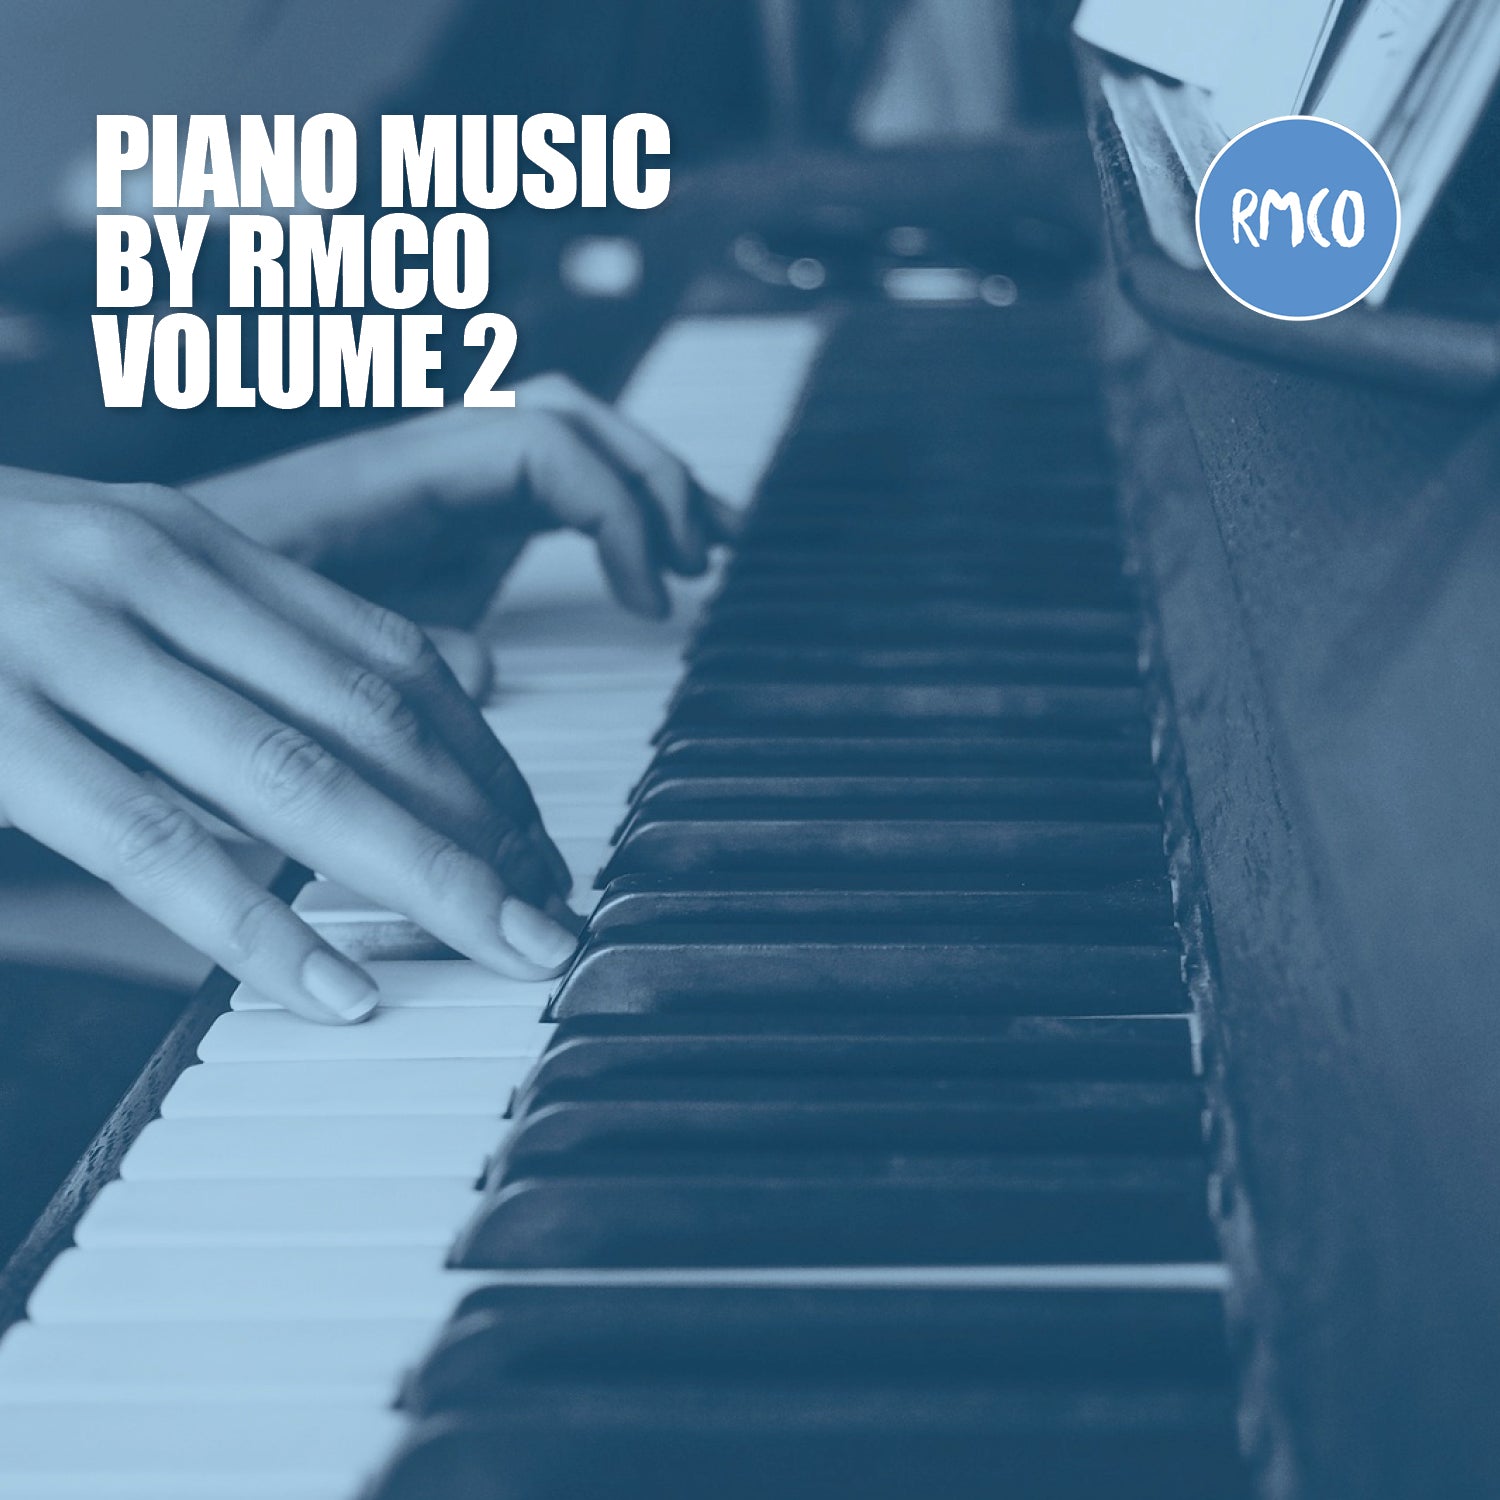 Piano Music, Vol. 2 by RMCO